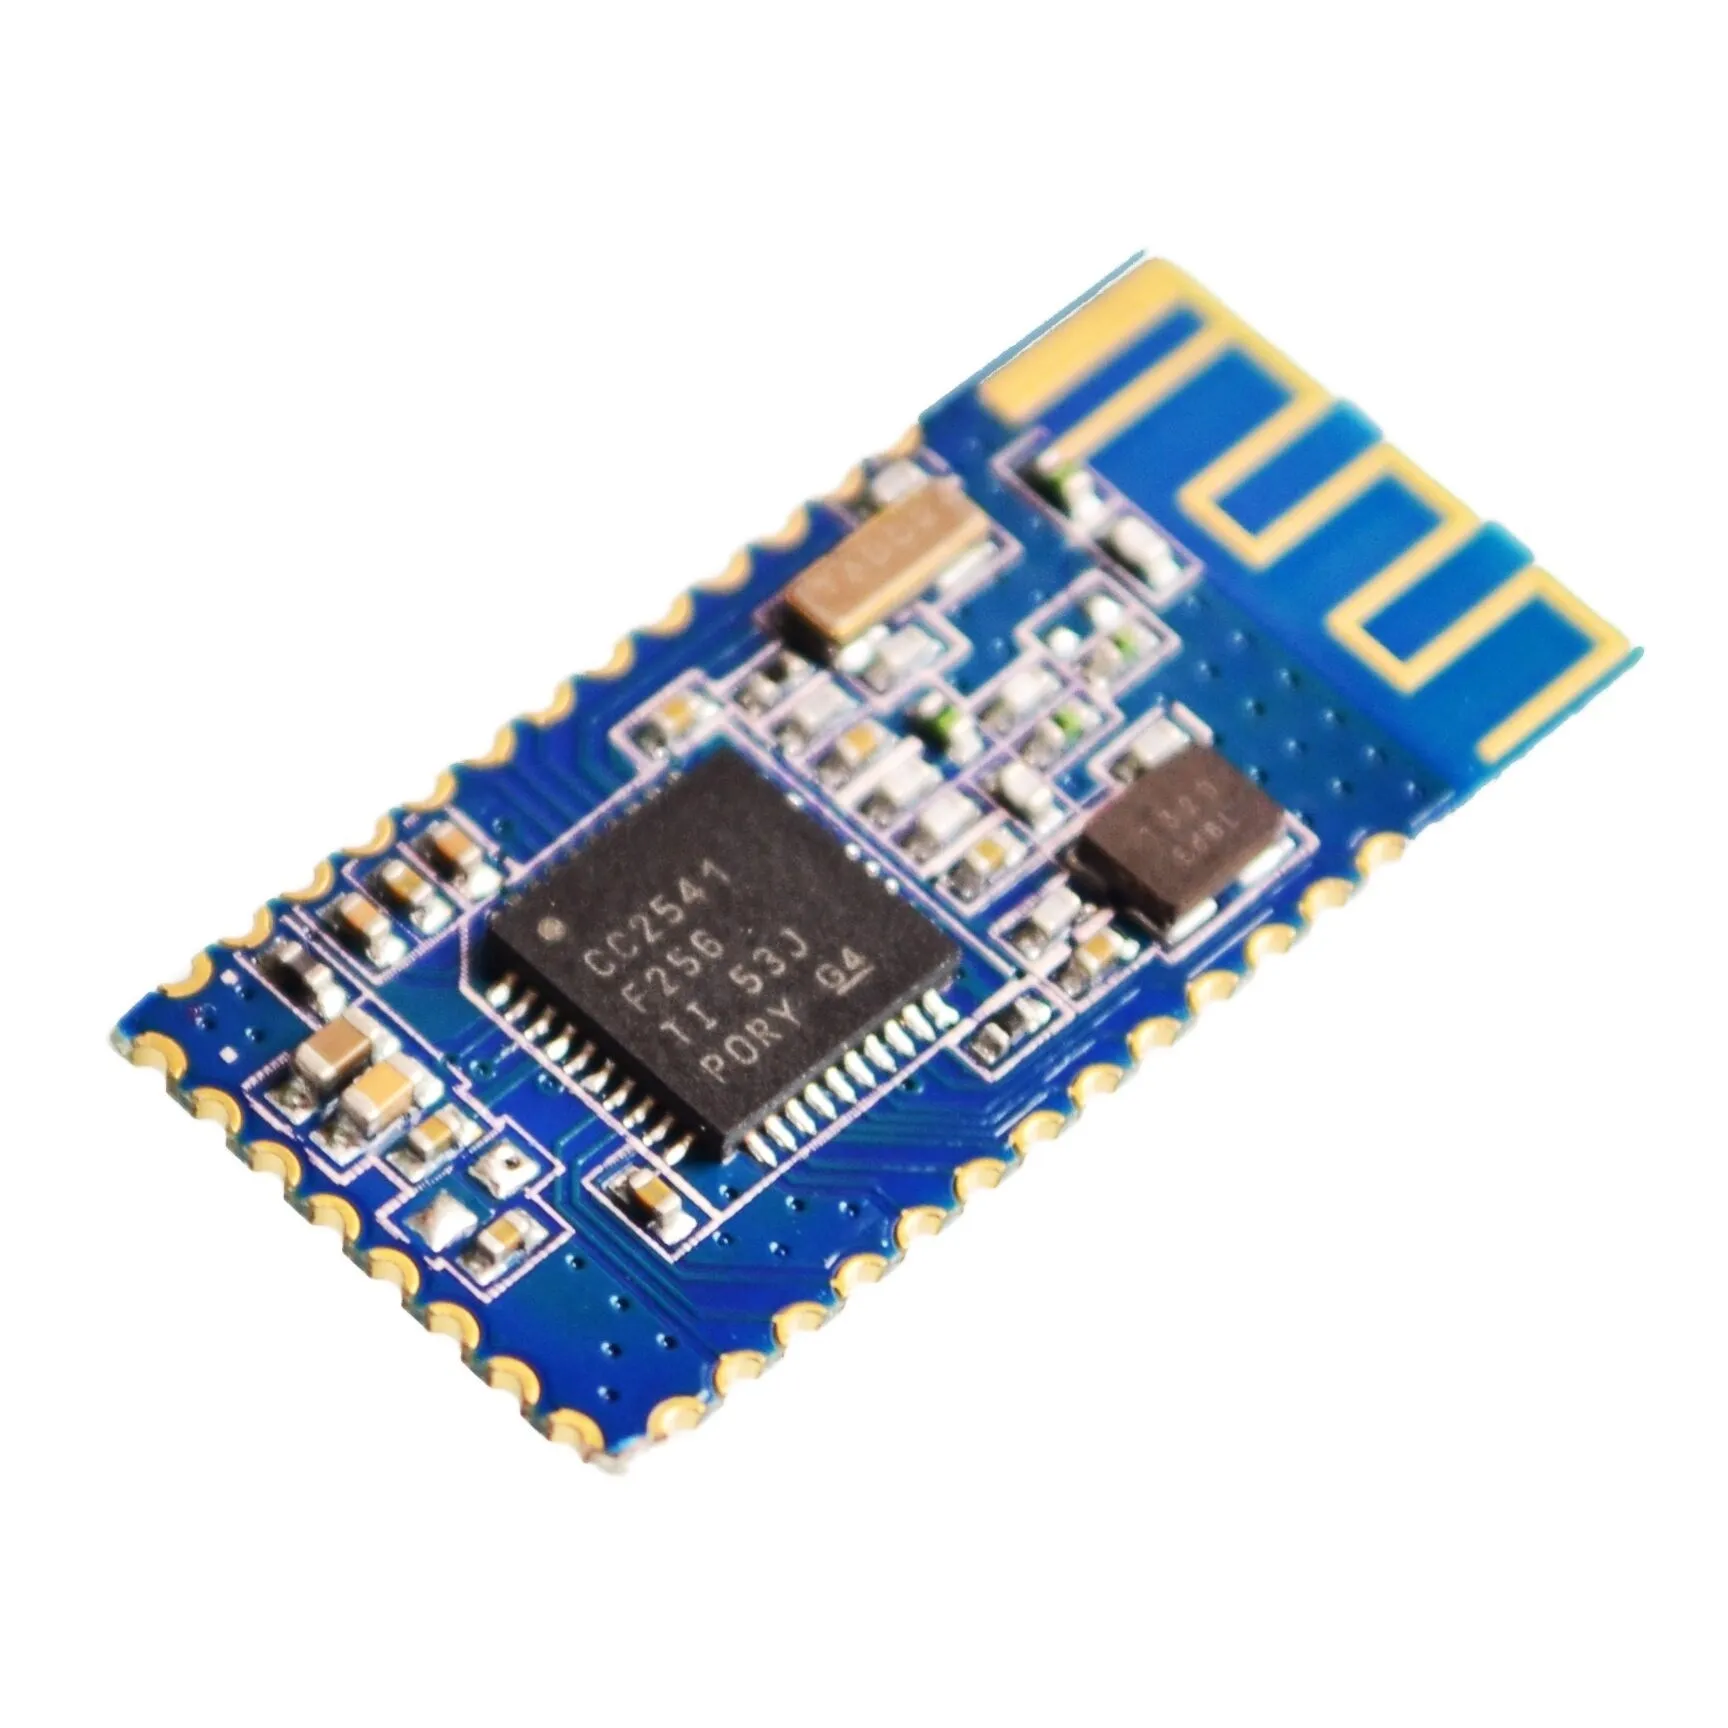 

HM-10 Cc2541 4.0 BLE For Bluetooth To Uart Transceiver Module Central & Peripheral Switching IBeacon AirLocate